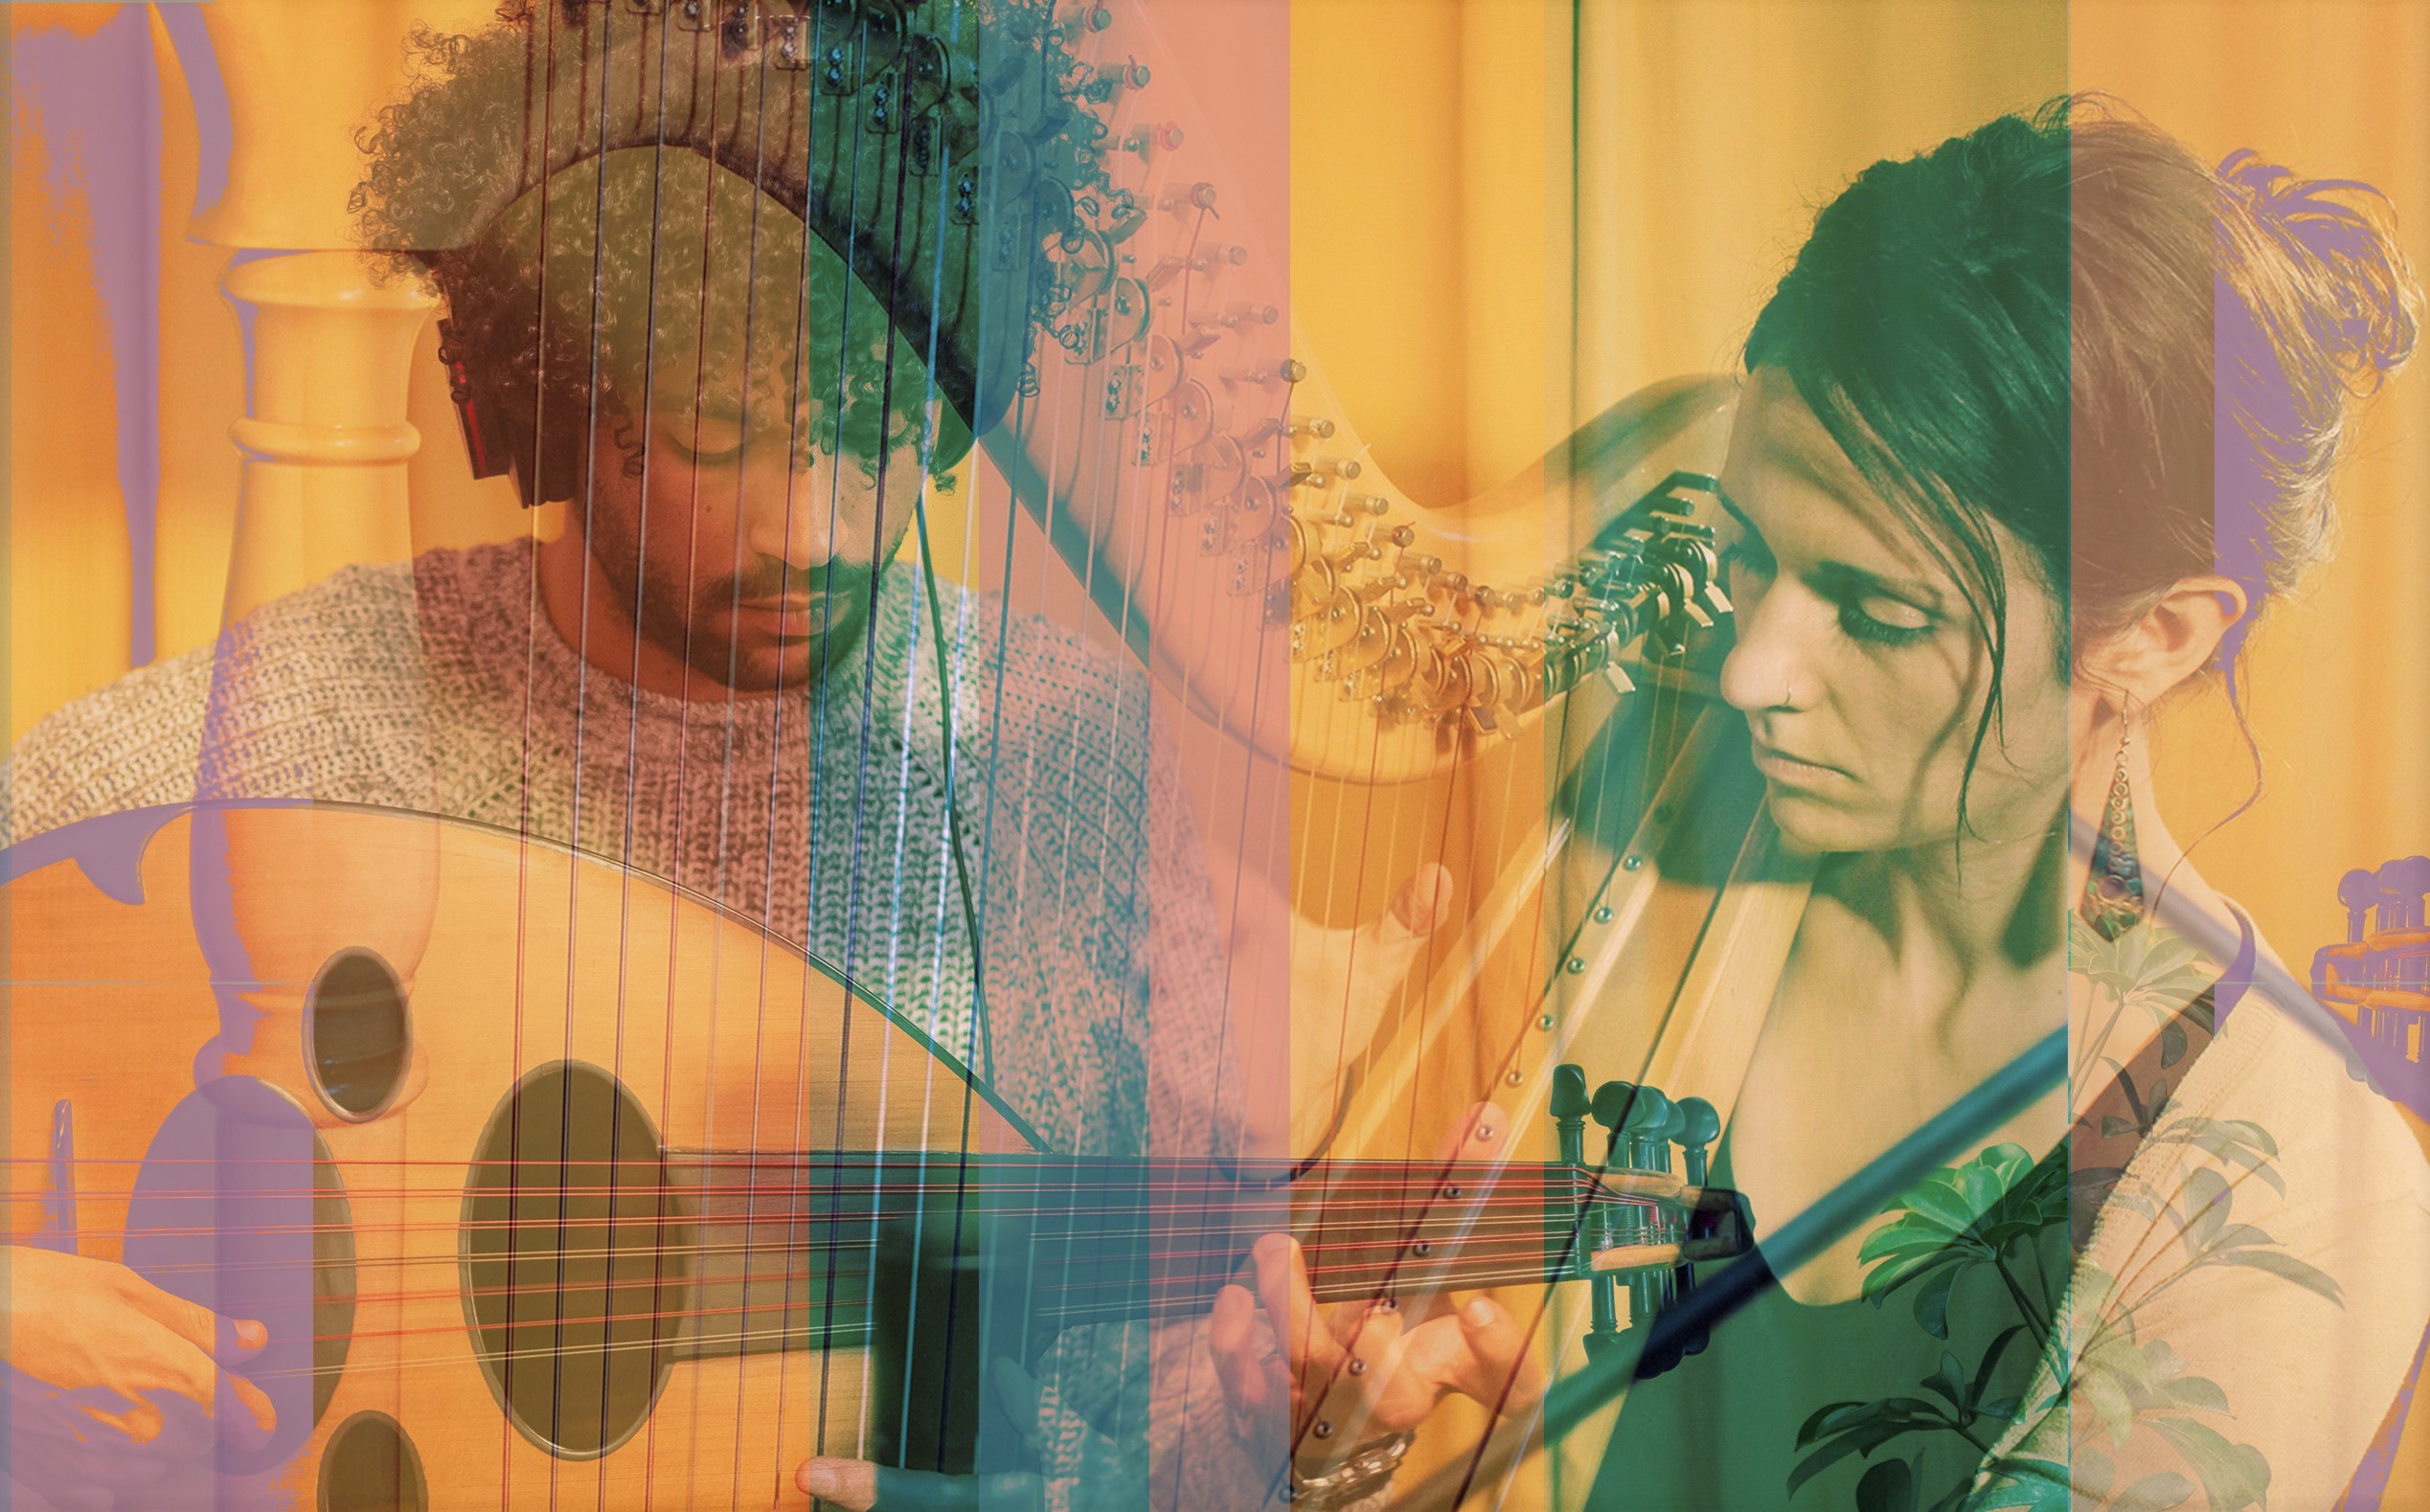 layered image showing a man playing Egyptian Oud and woman playing harp